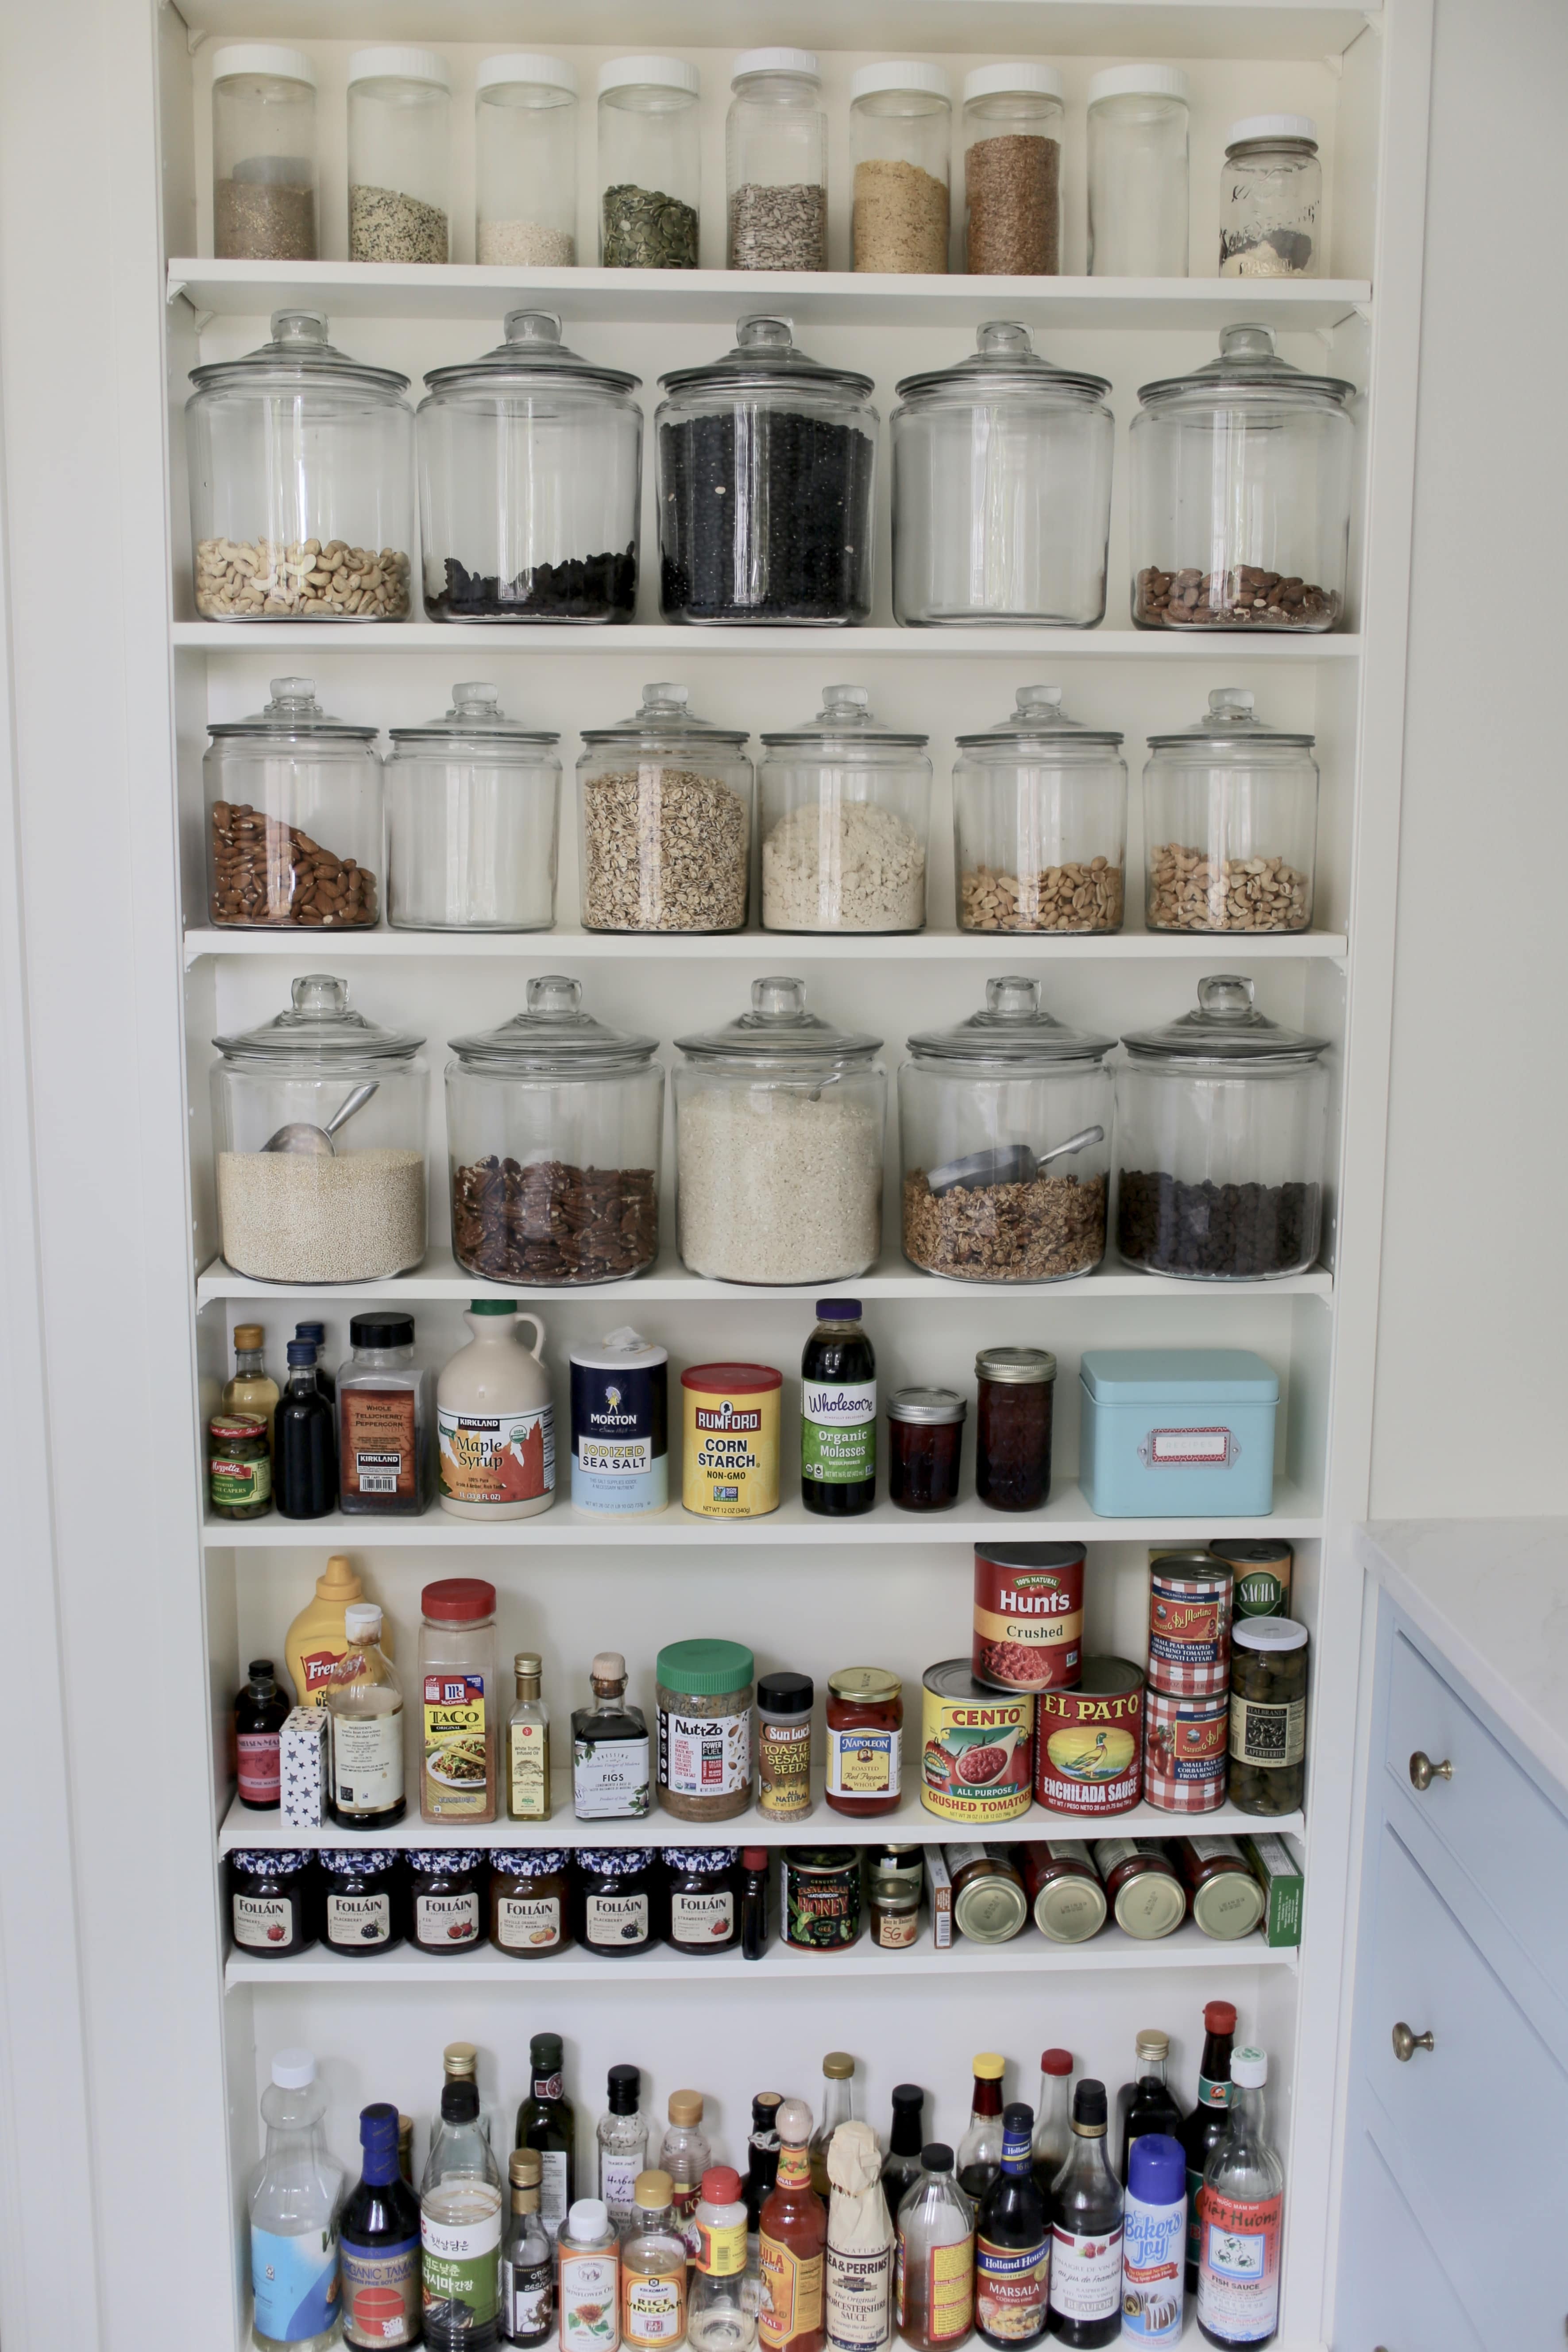 14 Ways To Organize Your Home With Jars- Organizing with jars is an easy way to get your home organized on a budget! Check out all the clever storage solutions you can create with jars! | #organizing #homeOrganization #organization #storageSolutions #ACultivatedNest